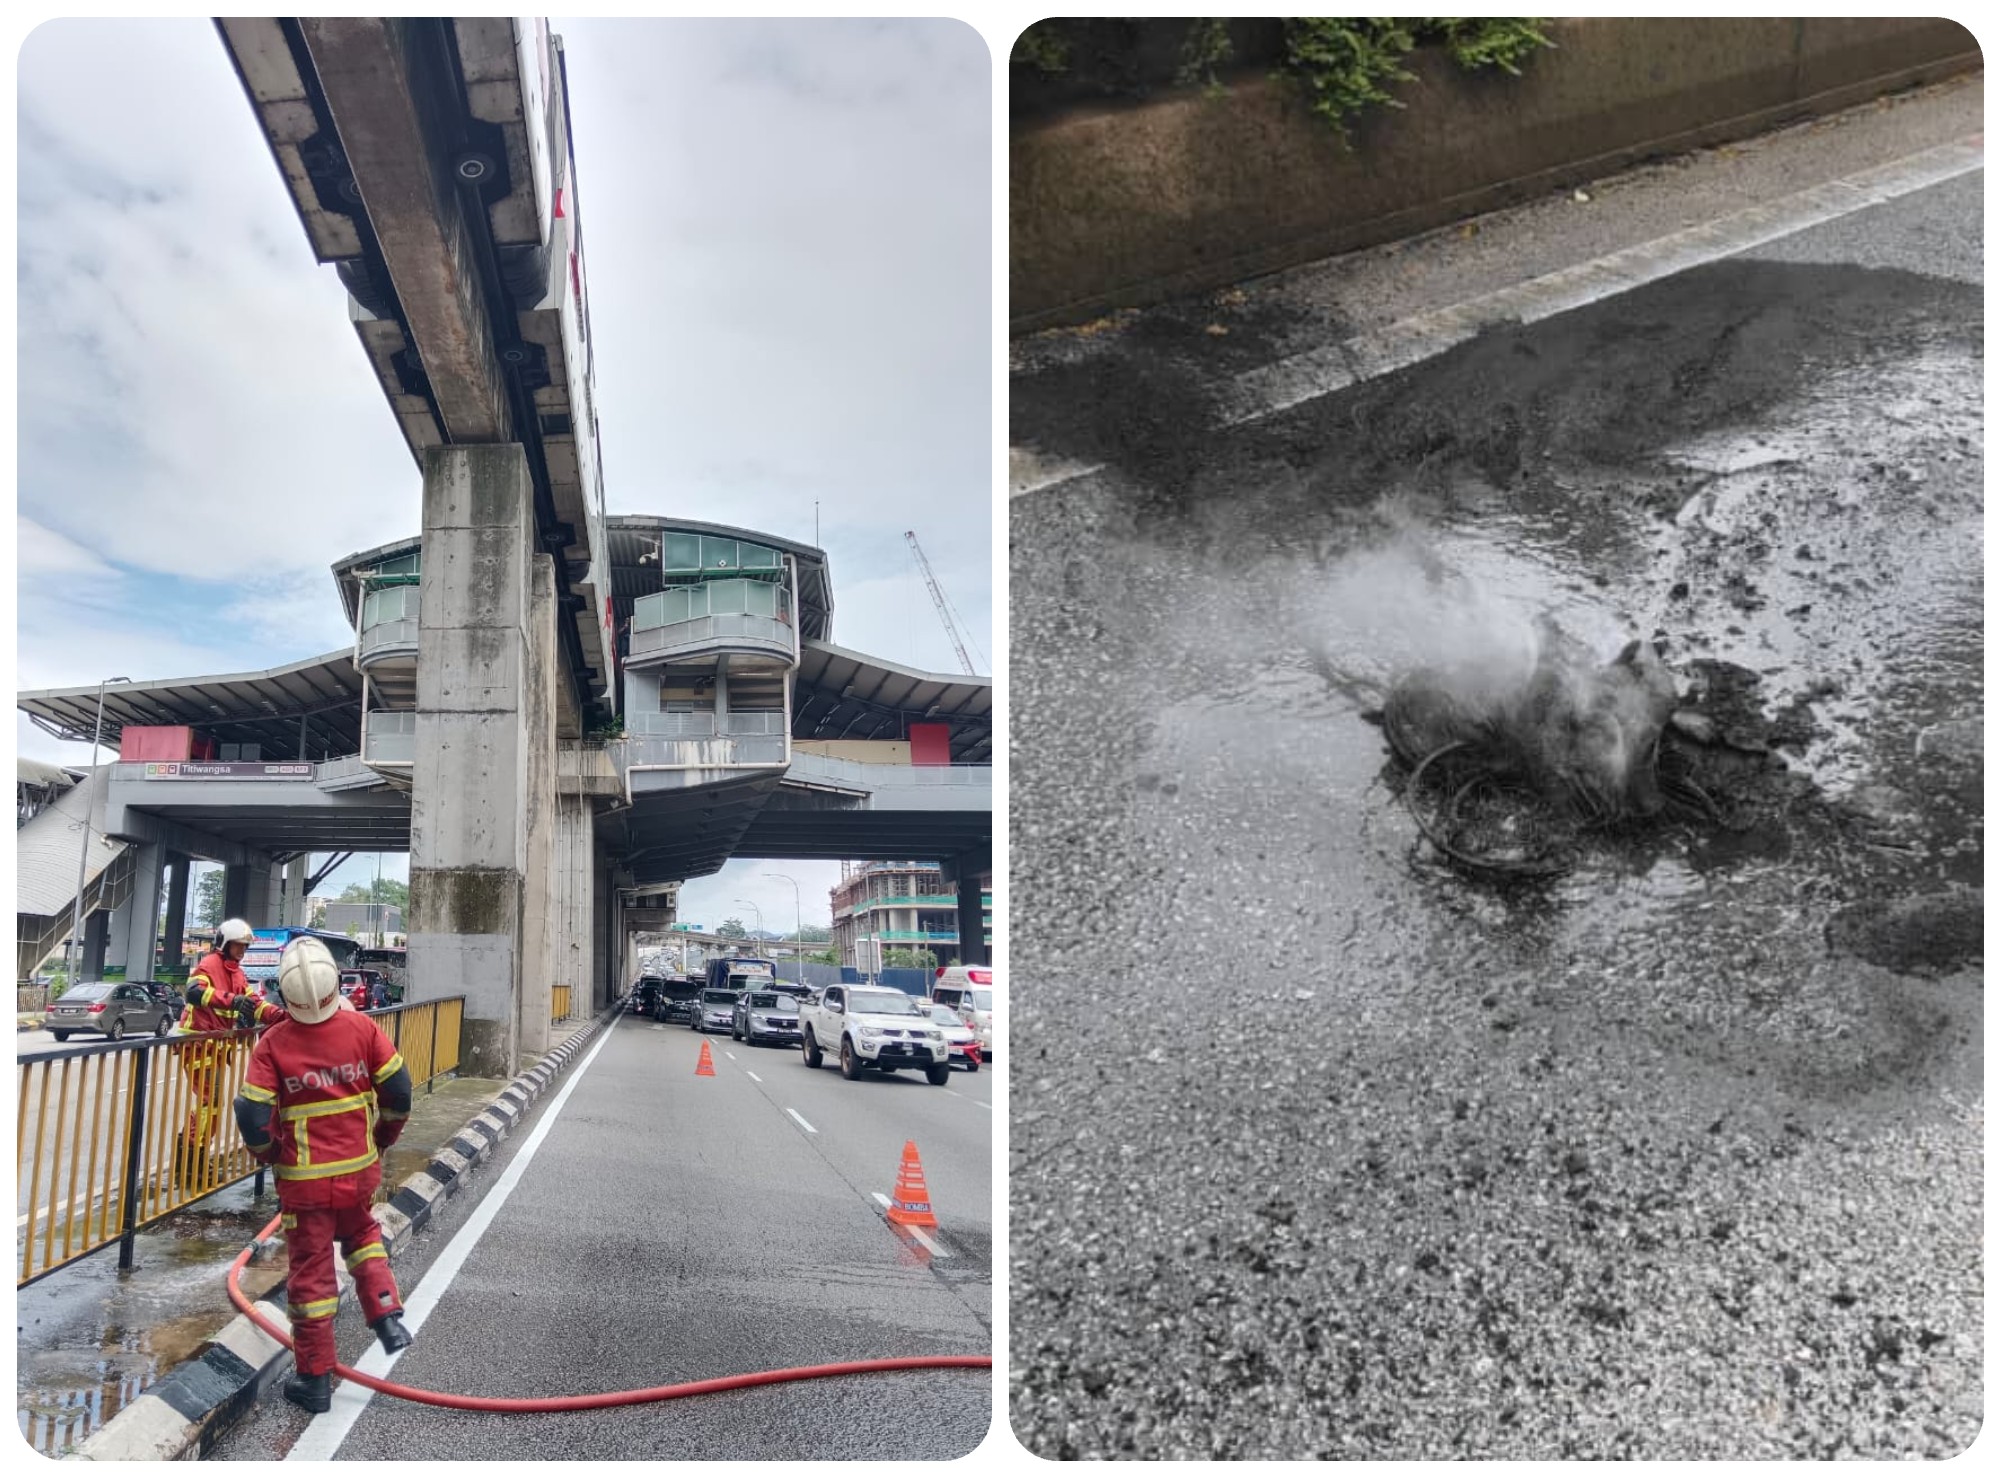 KL Monorail tire catches fire and falls on road below; no injuries reported